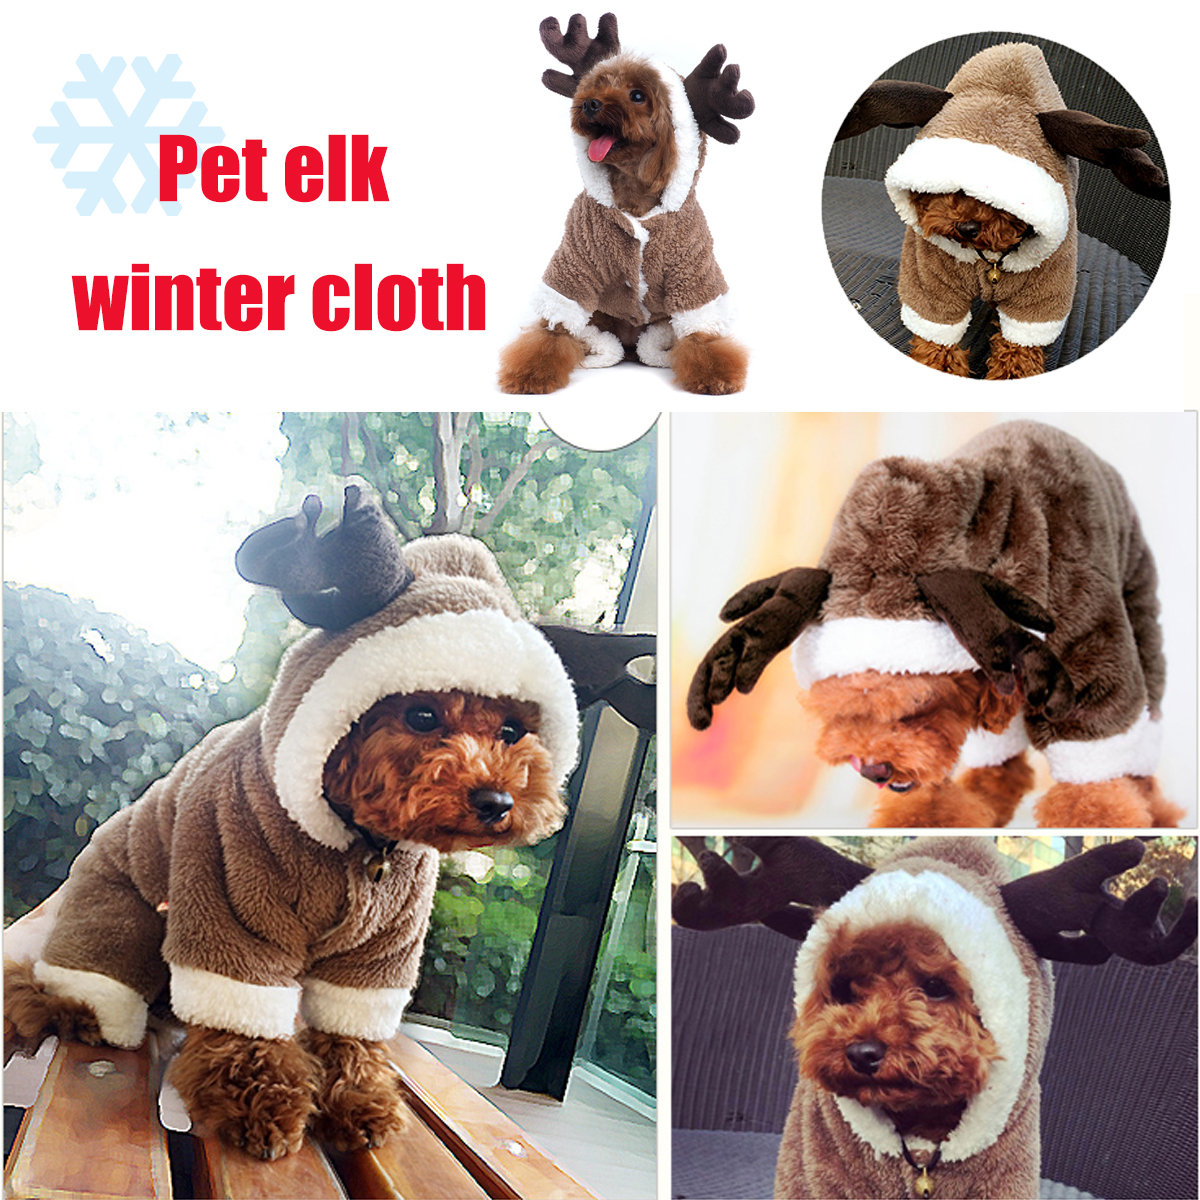 Pet-Dog-Cat-ElK-Costumes-Winter-Clothes-Puppy-Suit-Christmas-Party-Dress-Cosplay-1230102-6